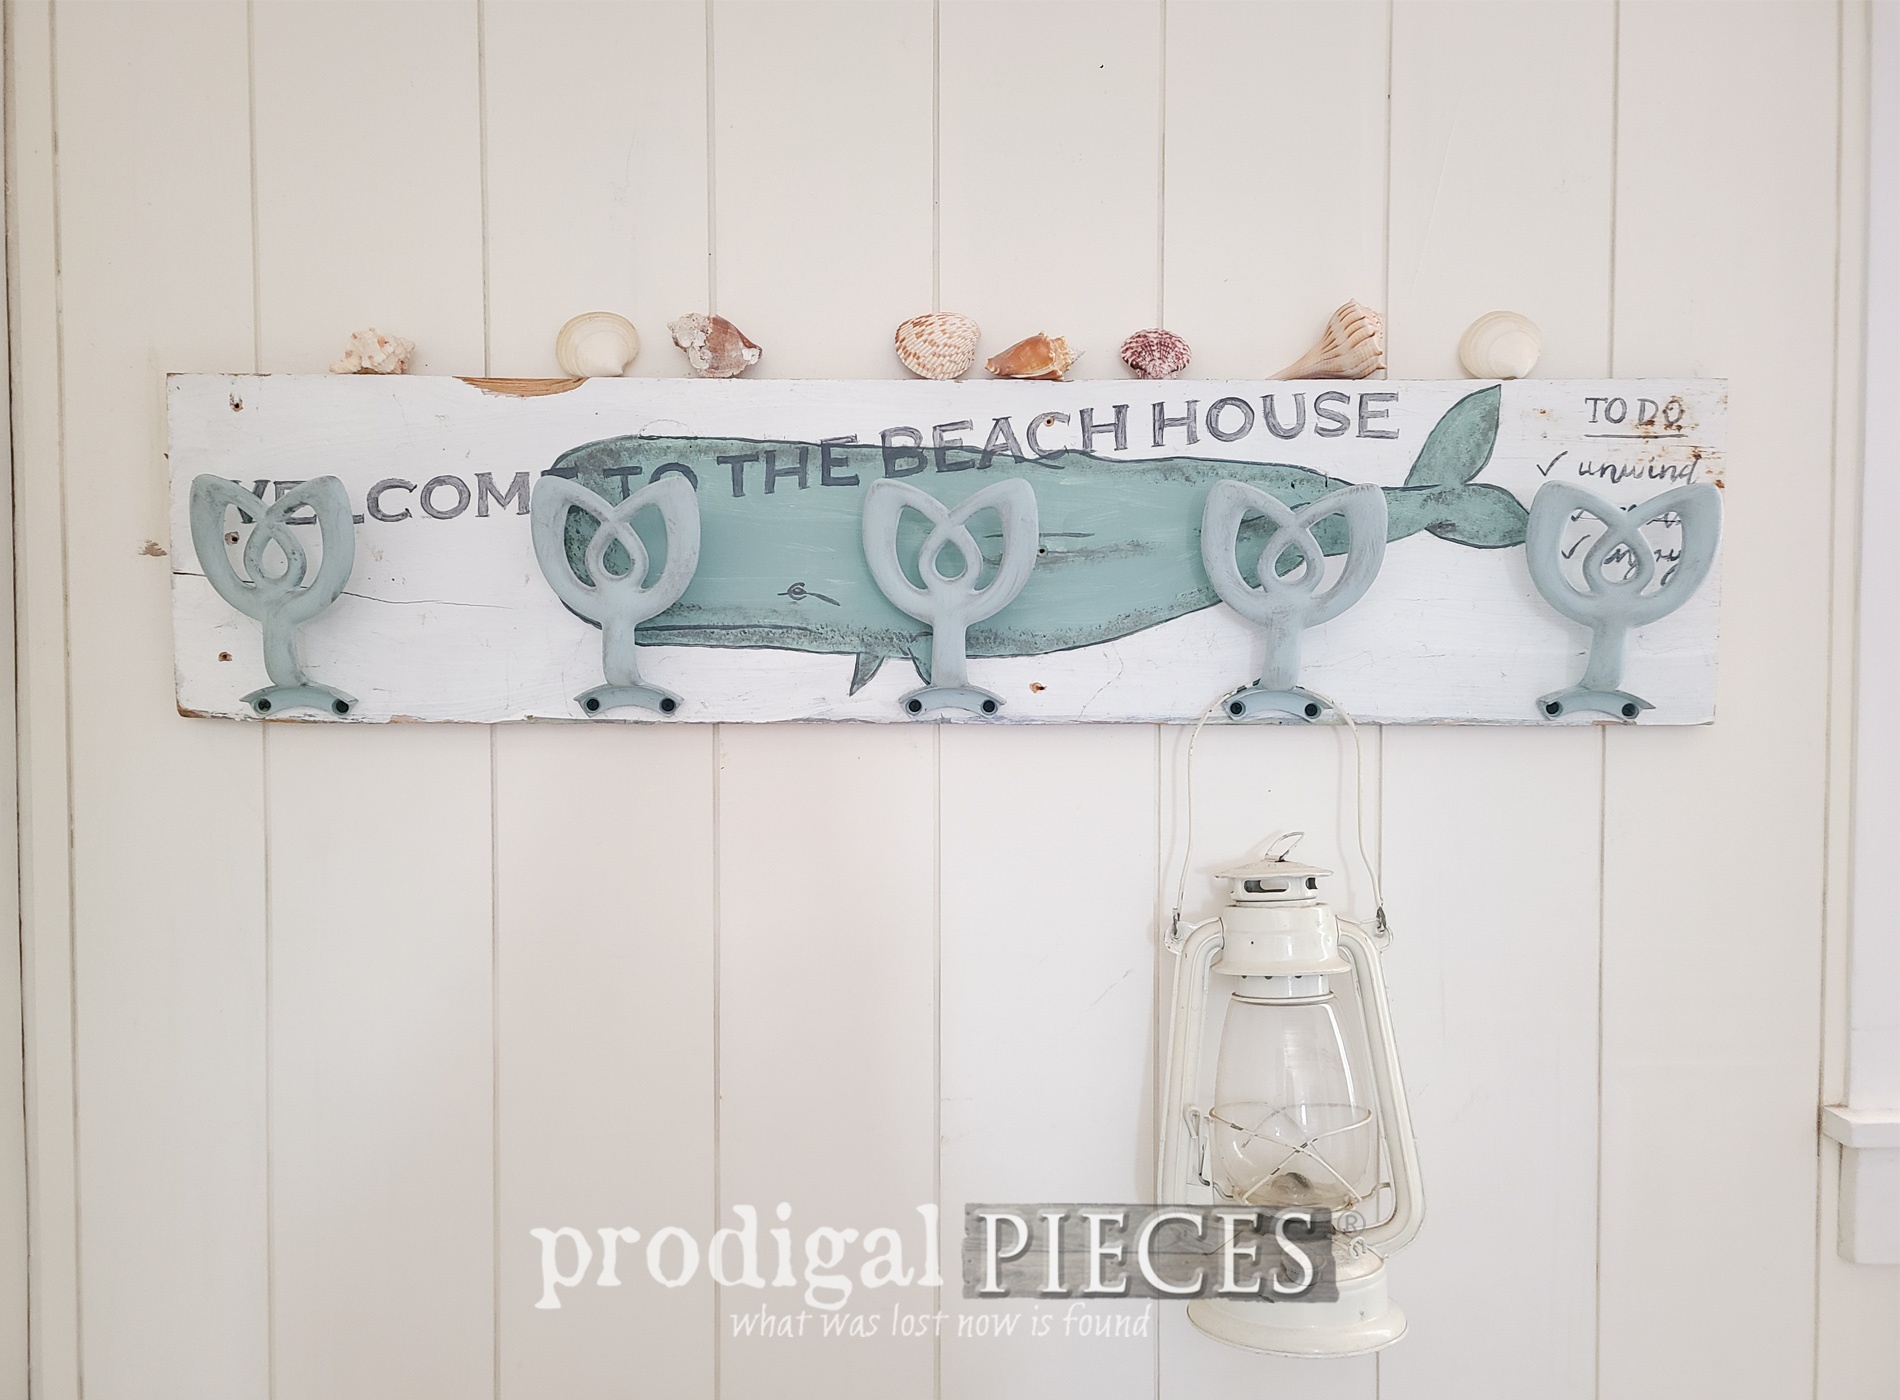 Take those broken parts and make an upcycled ceiling fan hardware coat rack | Tutorial by Larissa of Prodigal Pieces | prodigalpieces.com #prodigalpieces #diy #upcycled #homedecor #coastal #beach